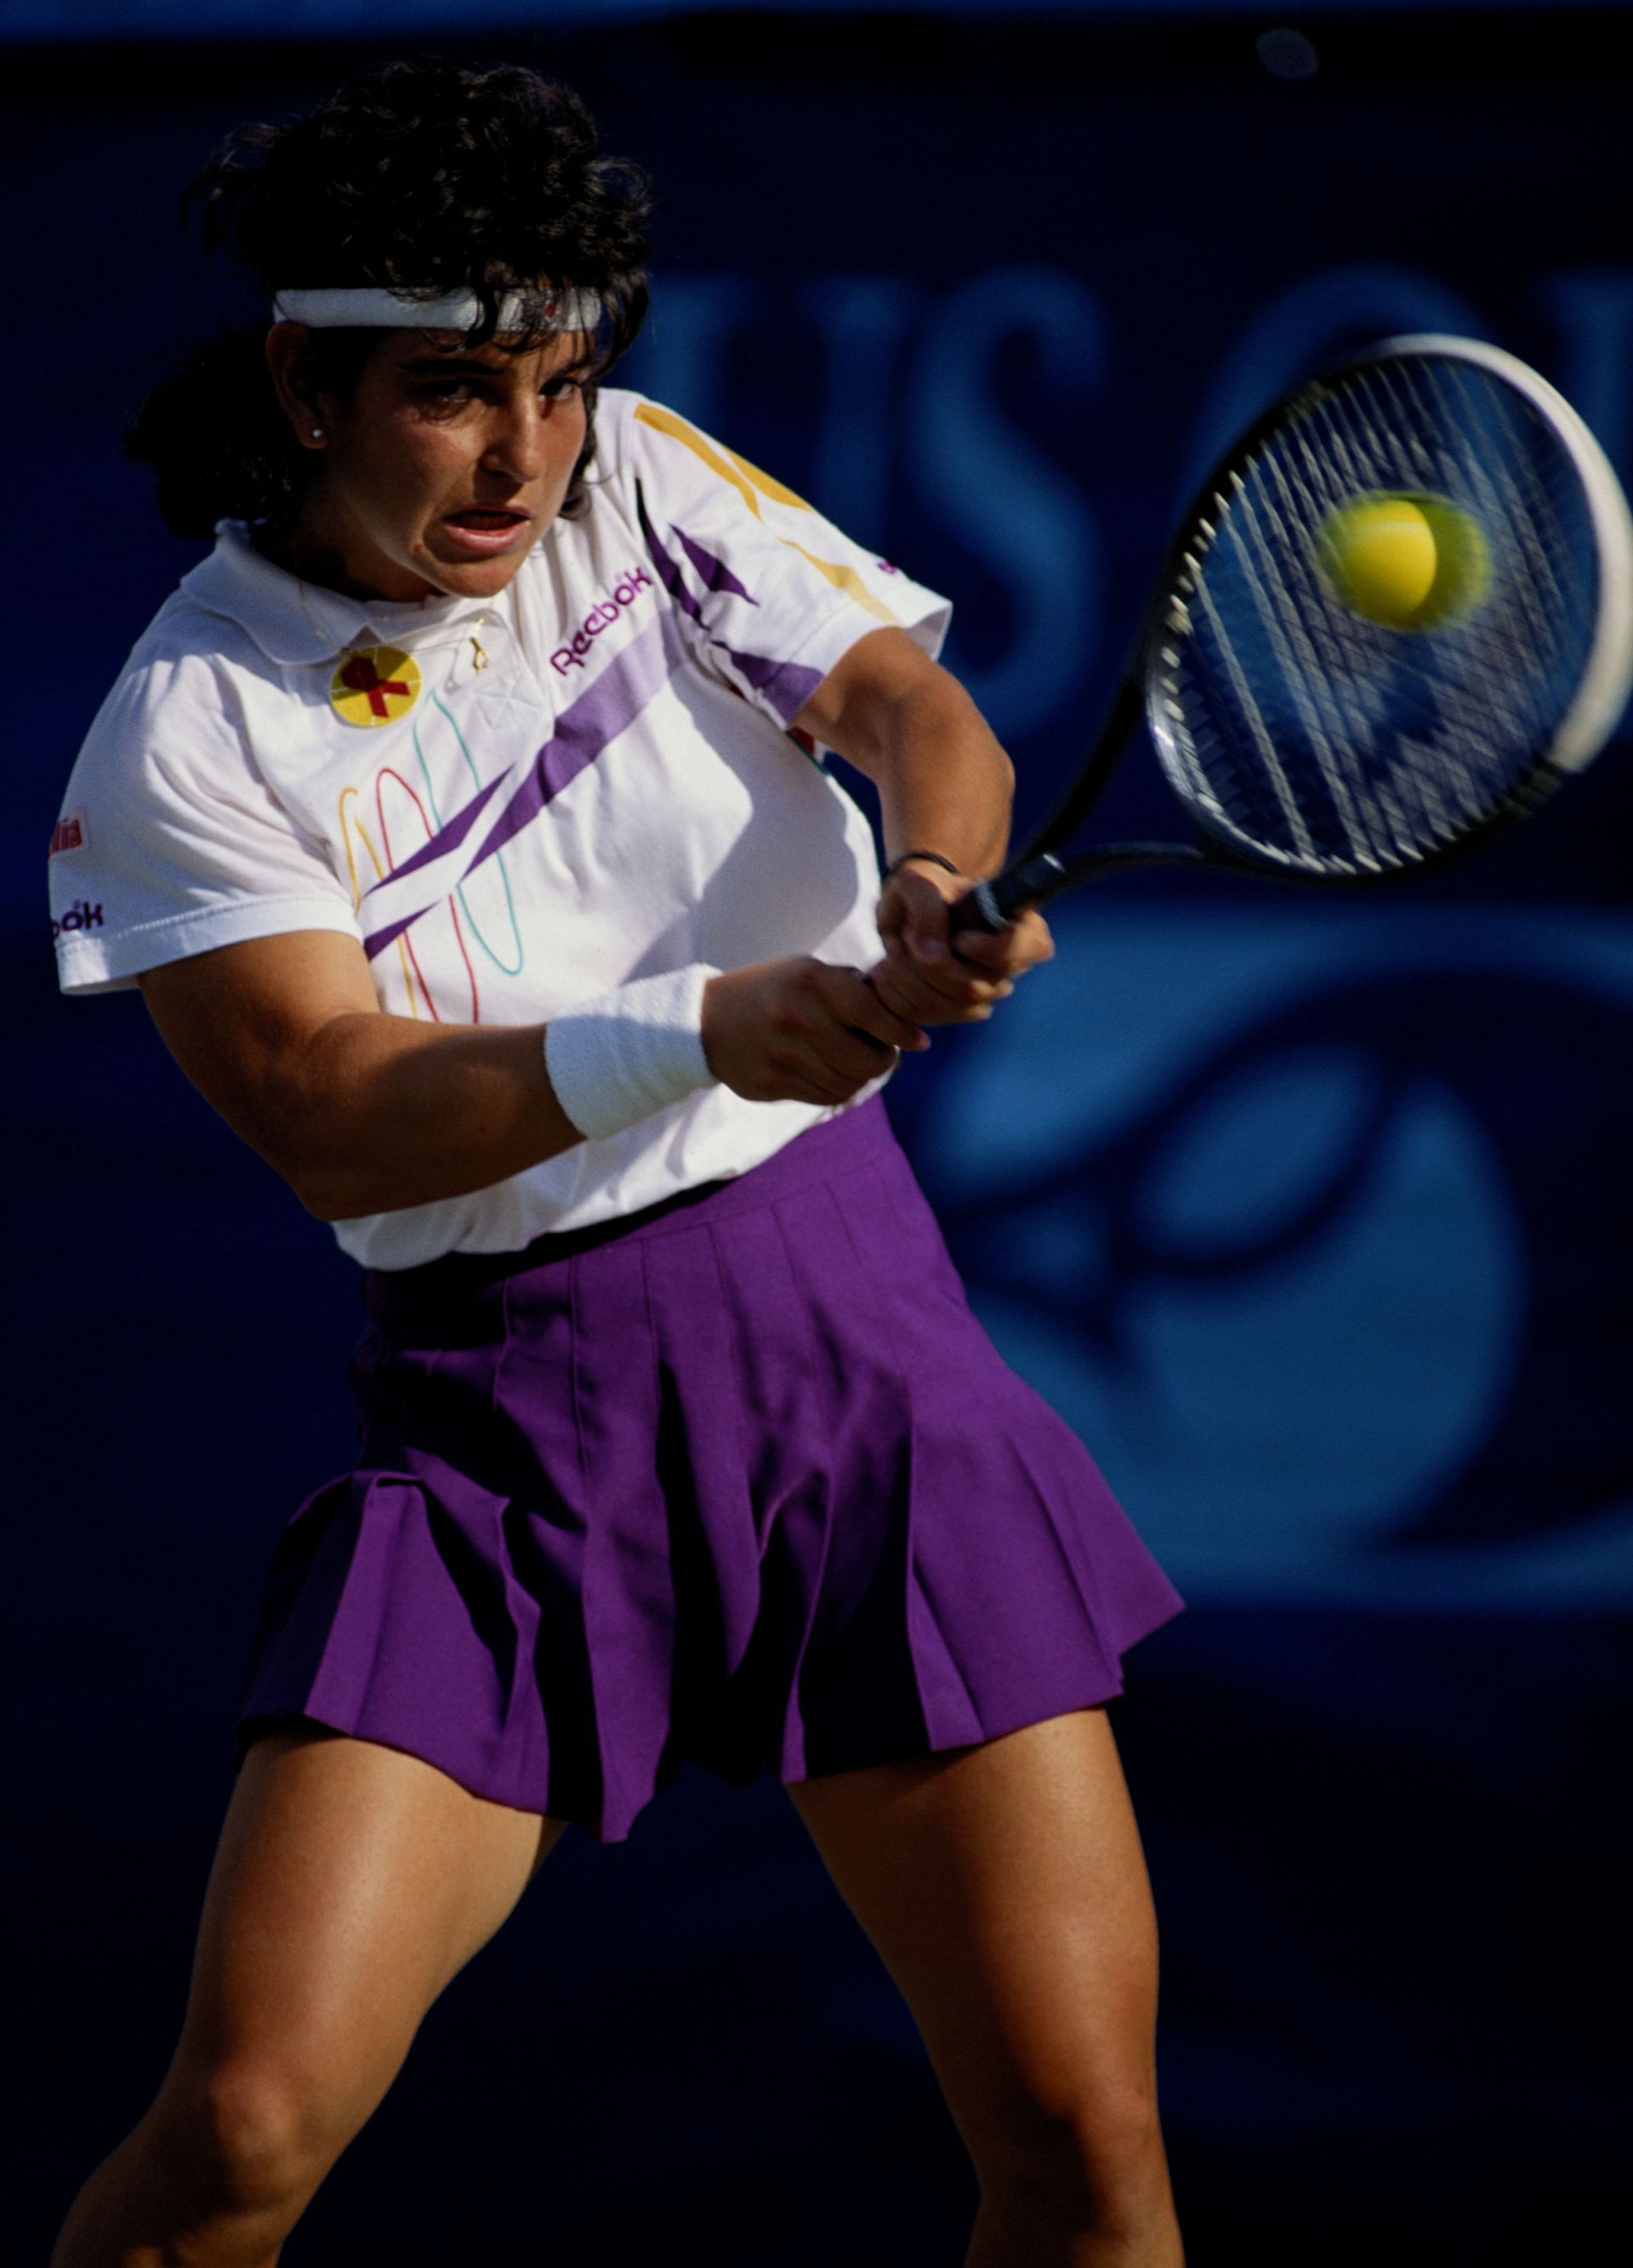 Arantxa Sanchez Vicario played 16 singles matches against the Williams sisters